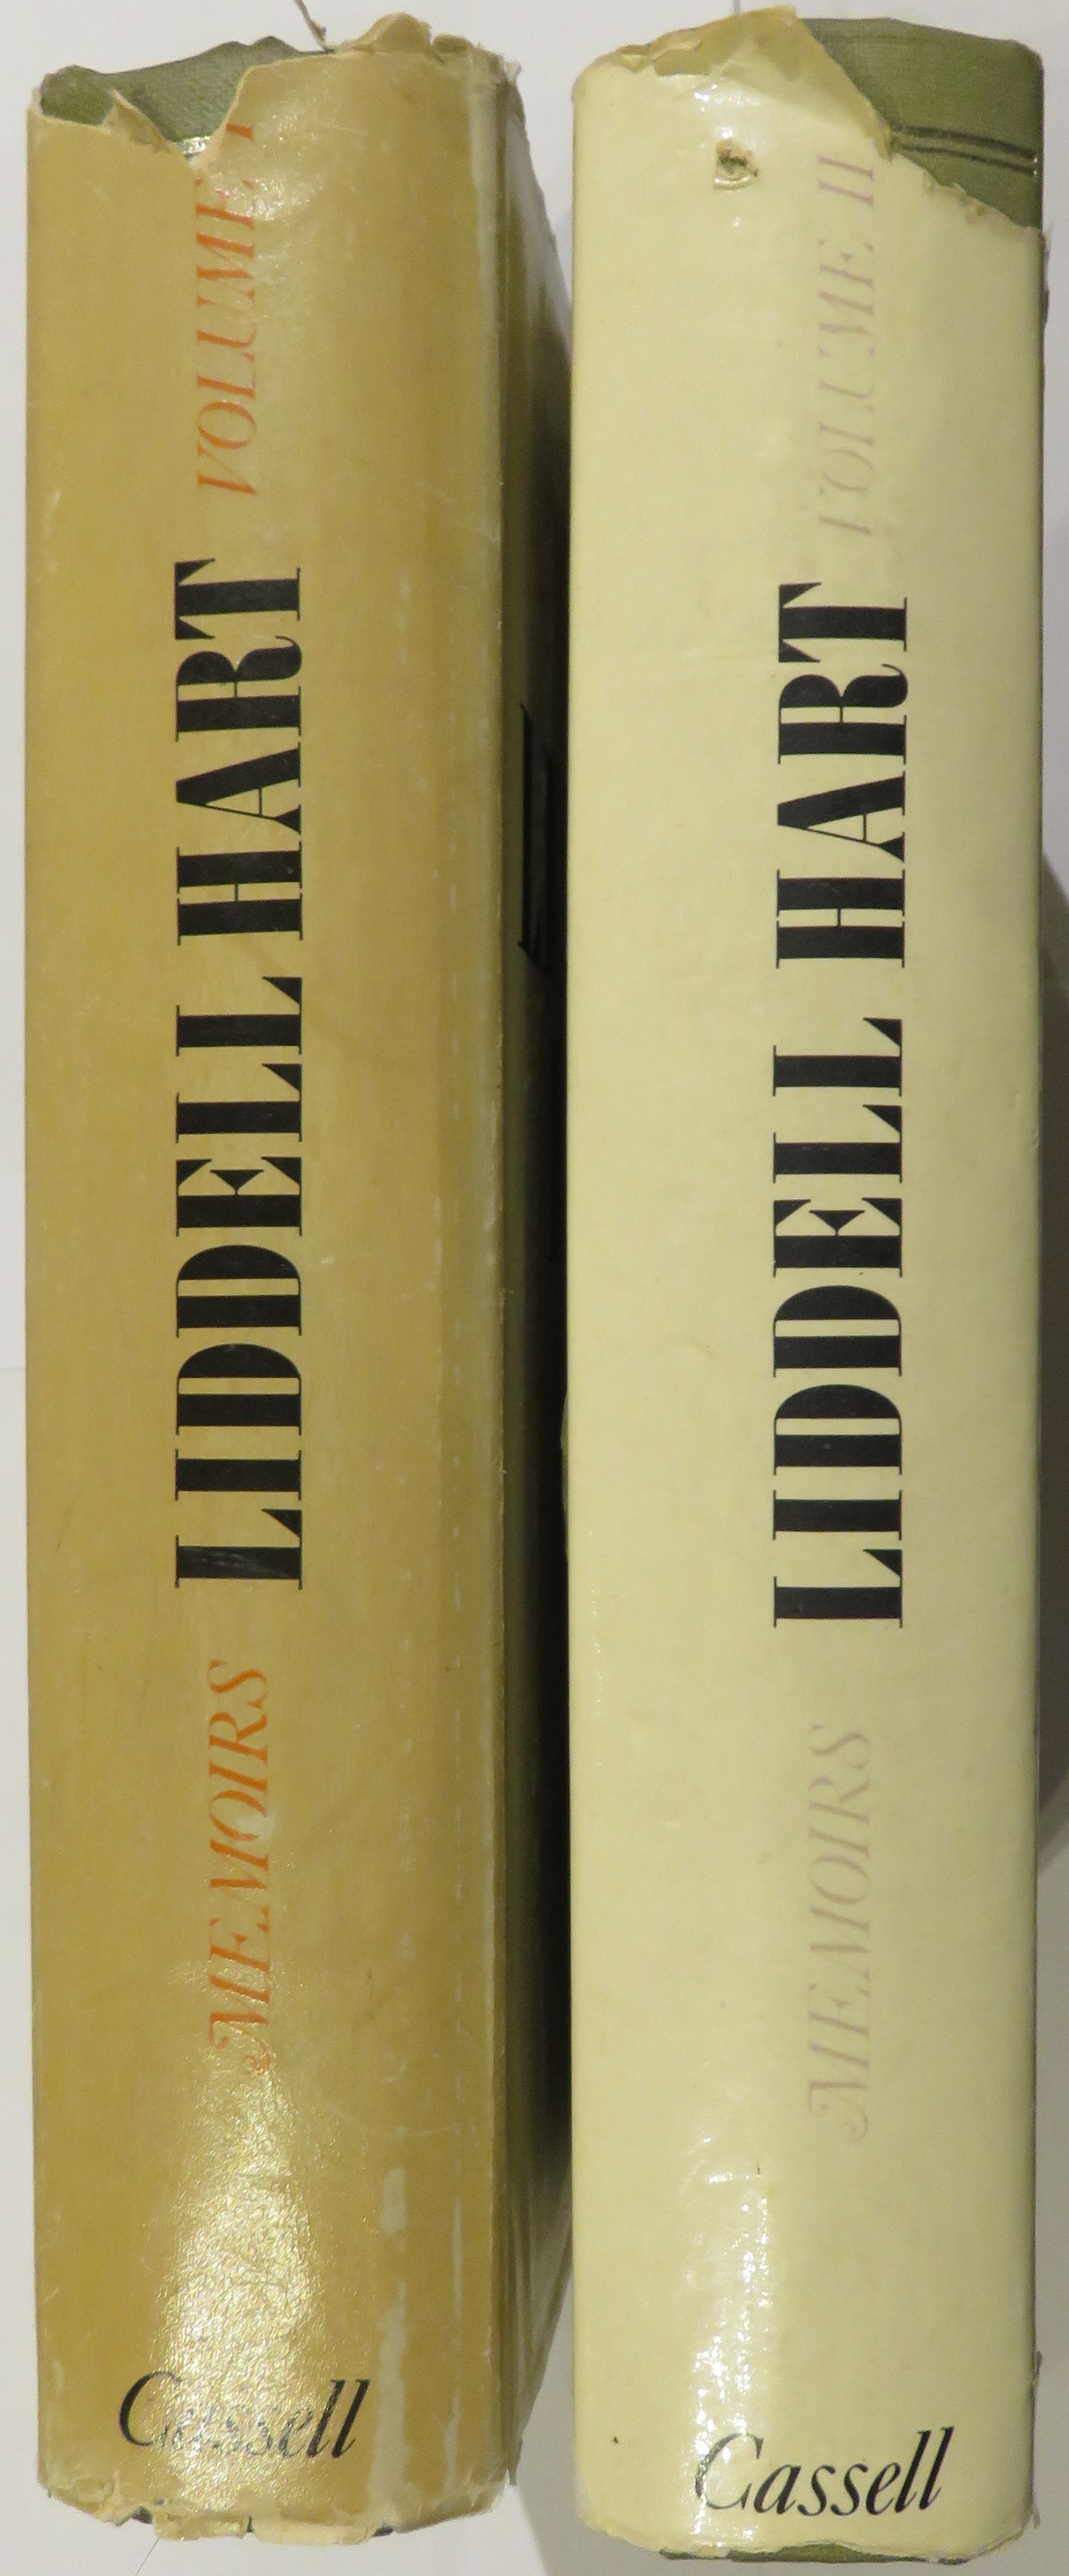 The Liddell Hart Memoirs (TWO VOLUMES)